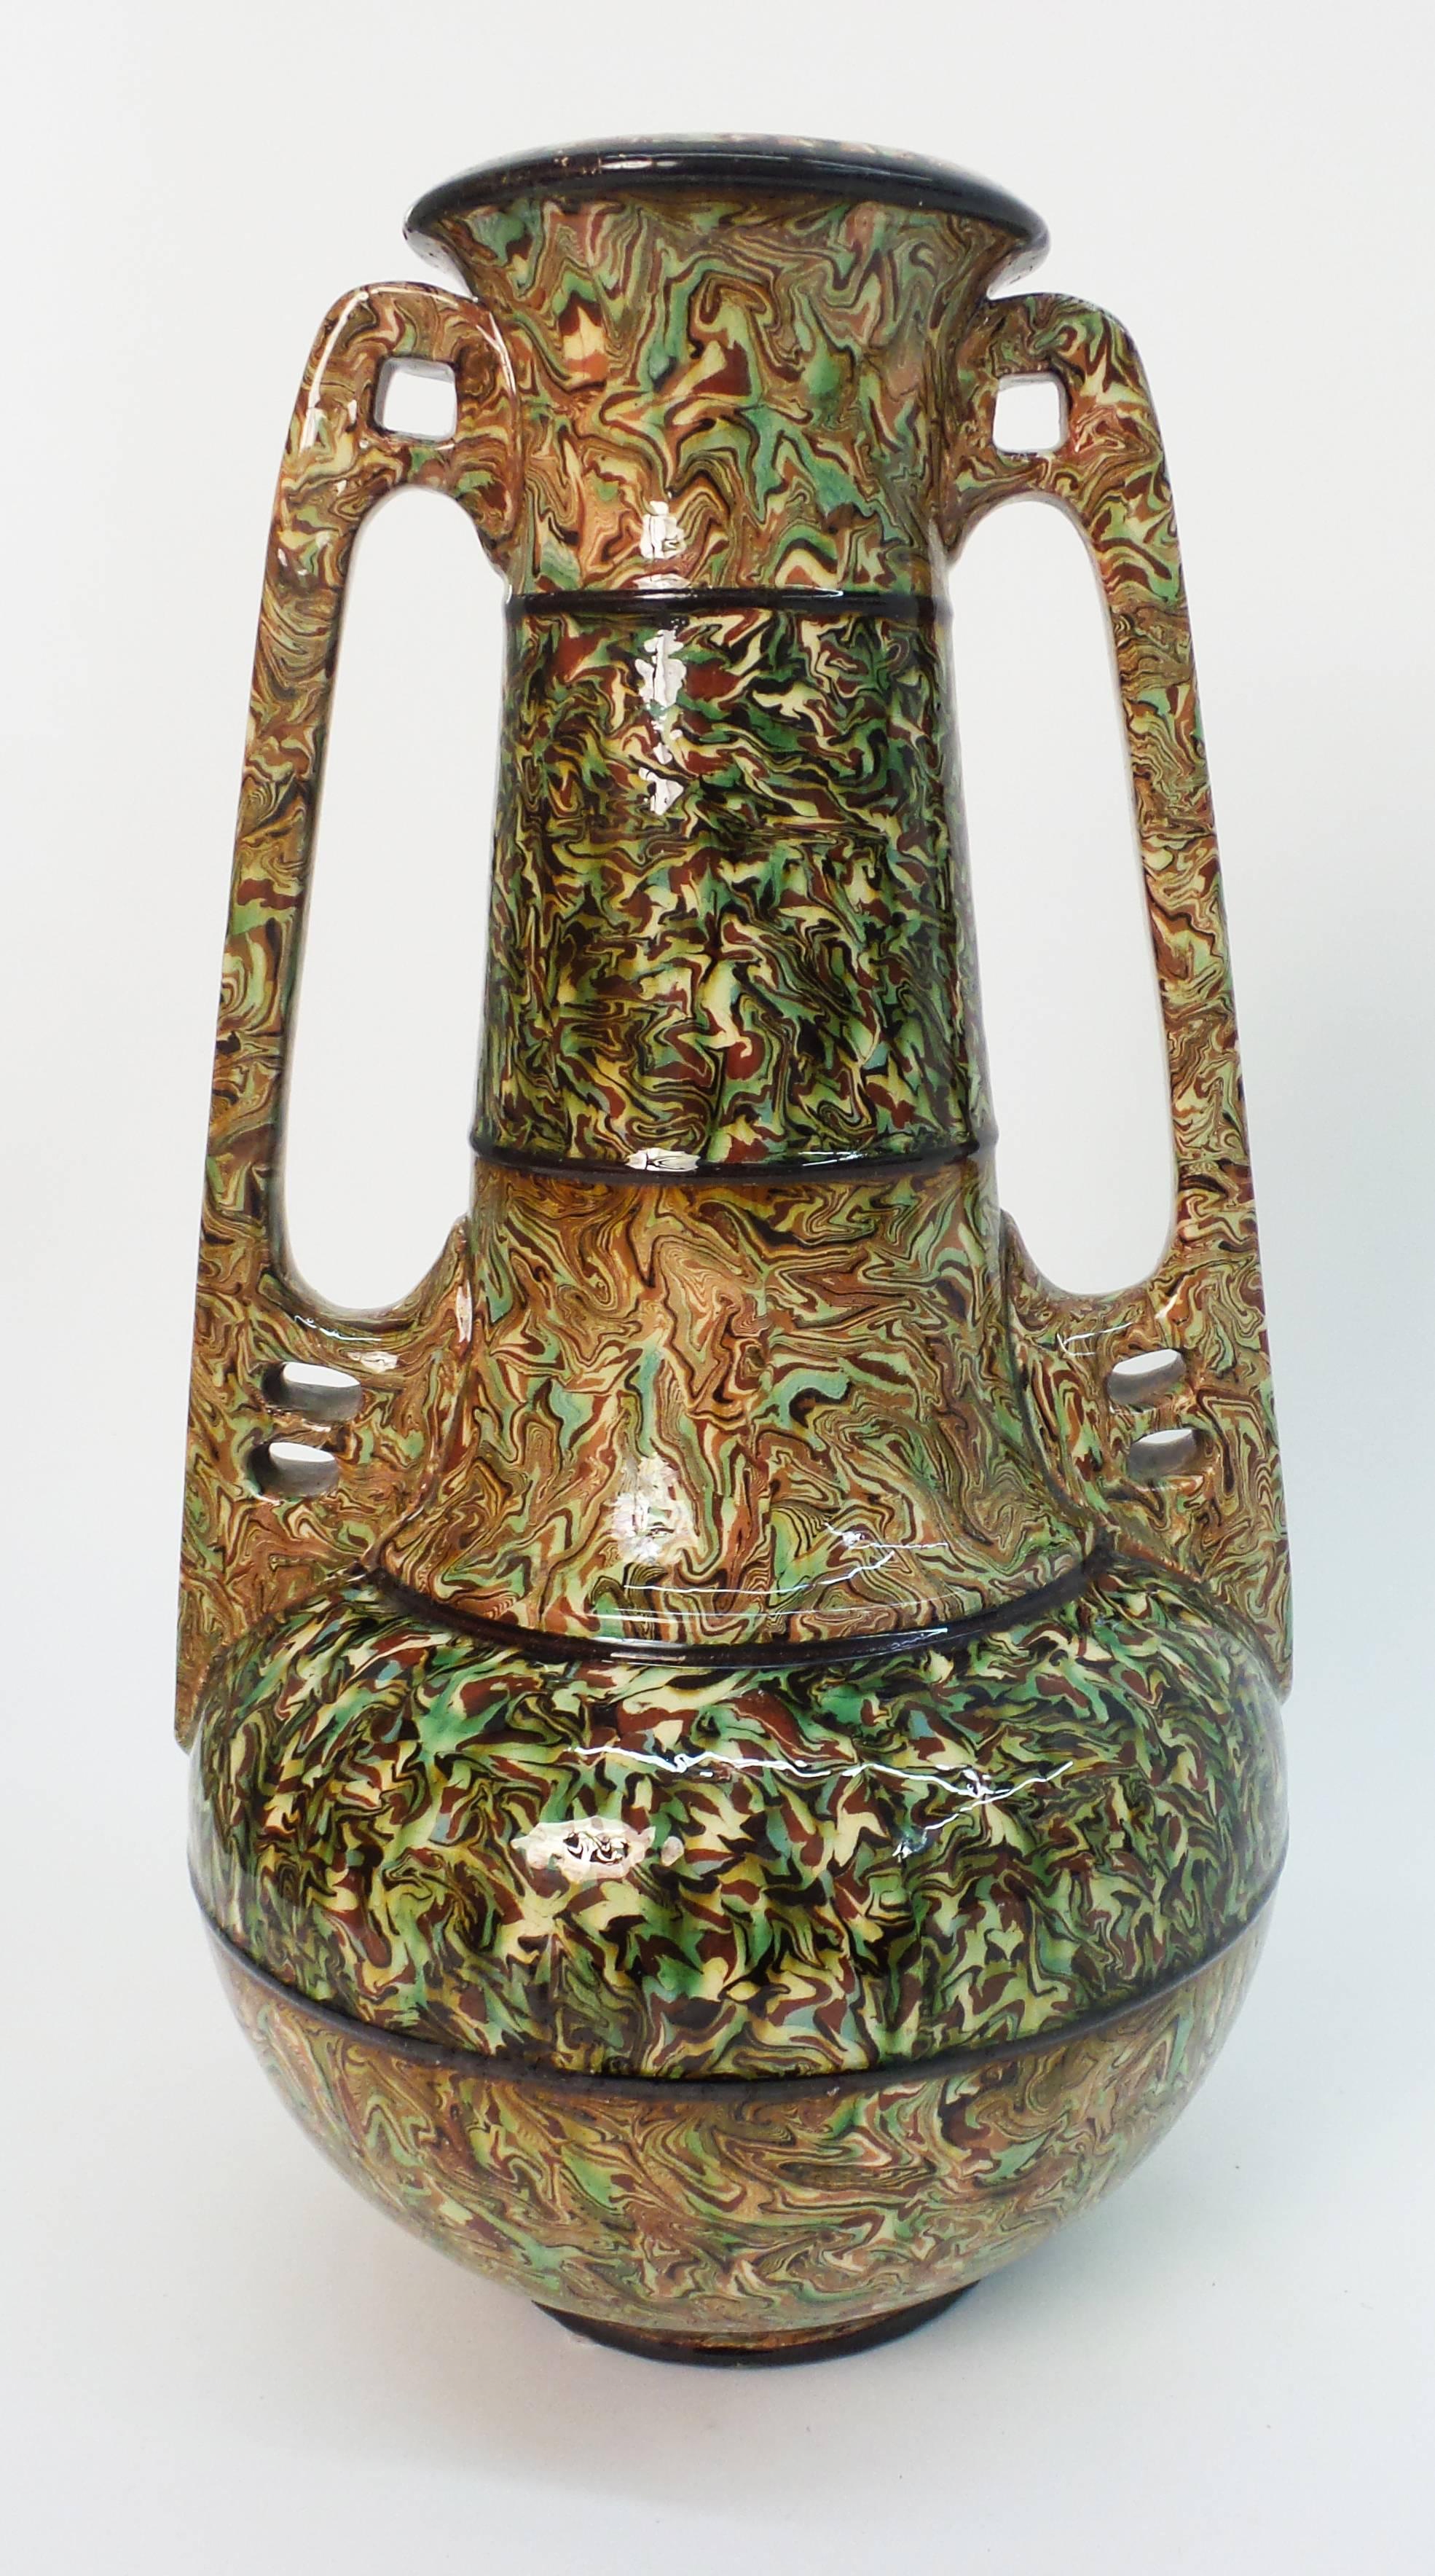 A rare, large mixed earth pottery vase of Art Nouveau design having pierced handles and made by Aurore Pichon. Signed, "Pichon a Uzes". 

A photo in Pichon book shows Aurore Pichon with an example of this model at his back.